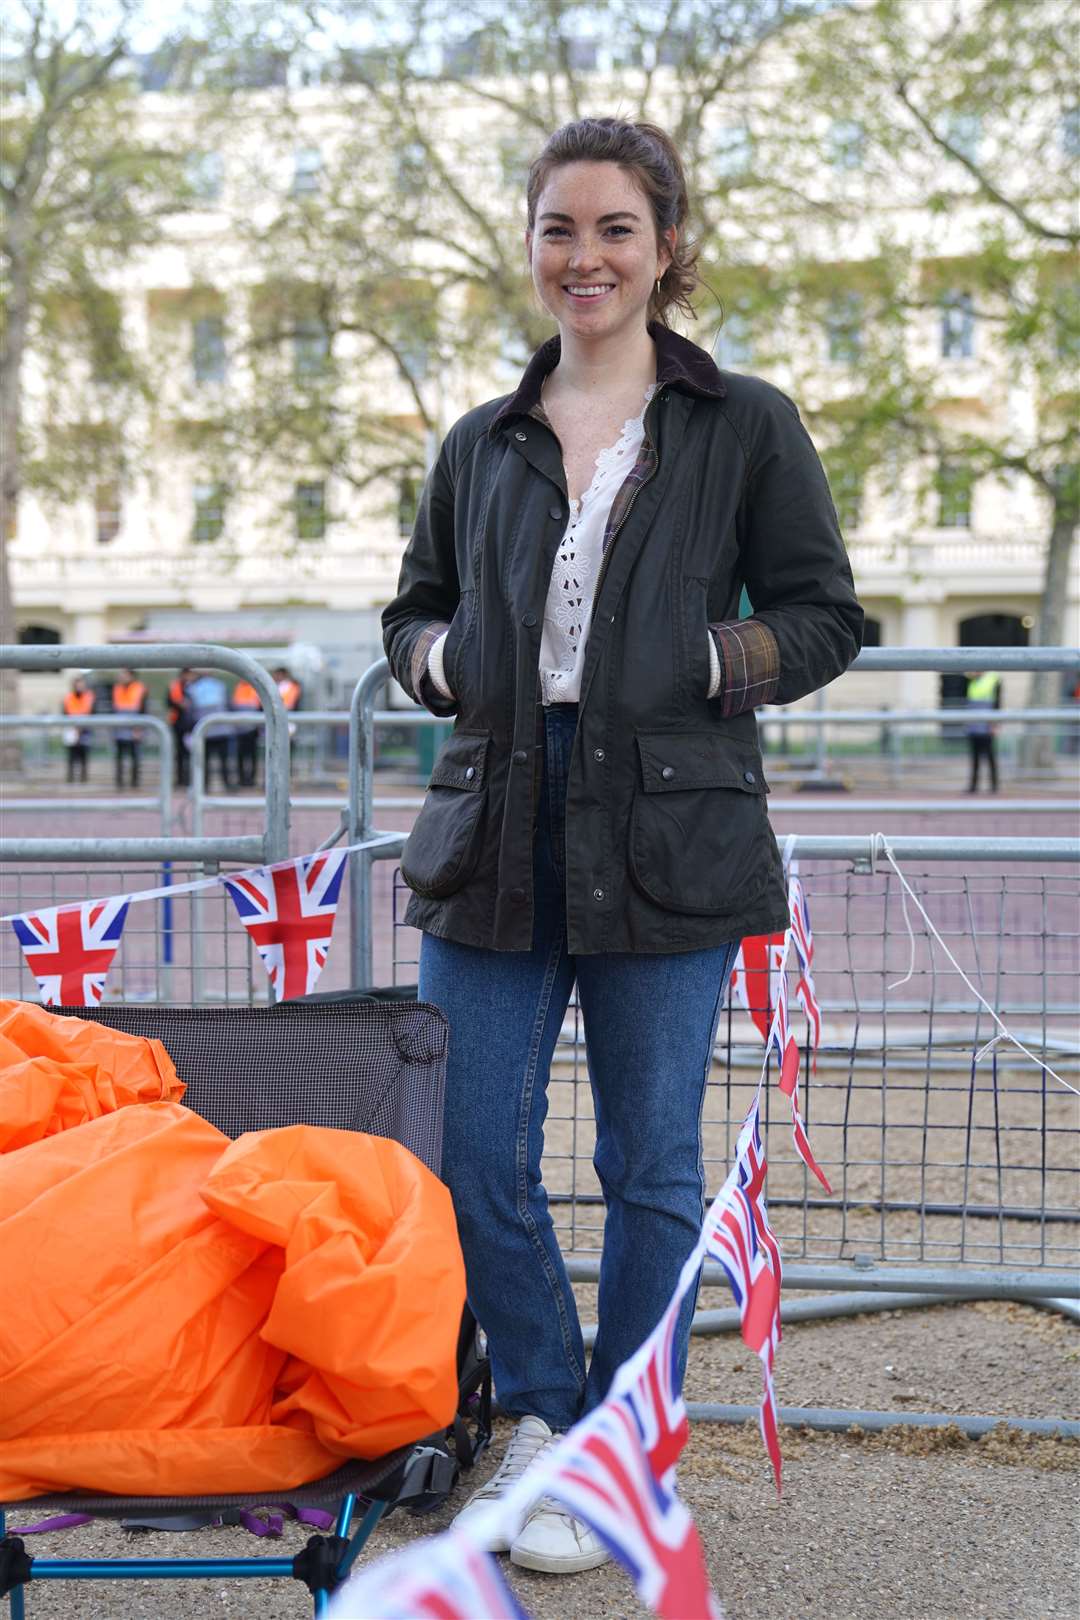 Sarah Exner, from Texas, on The Mall in central London(James Manning/PA)